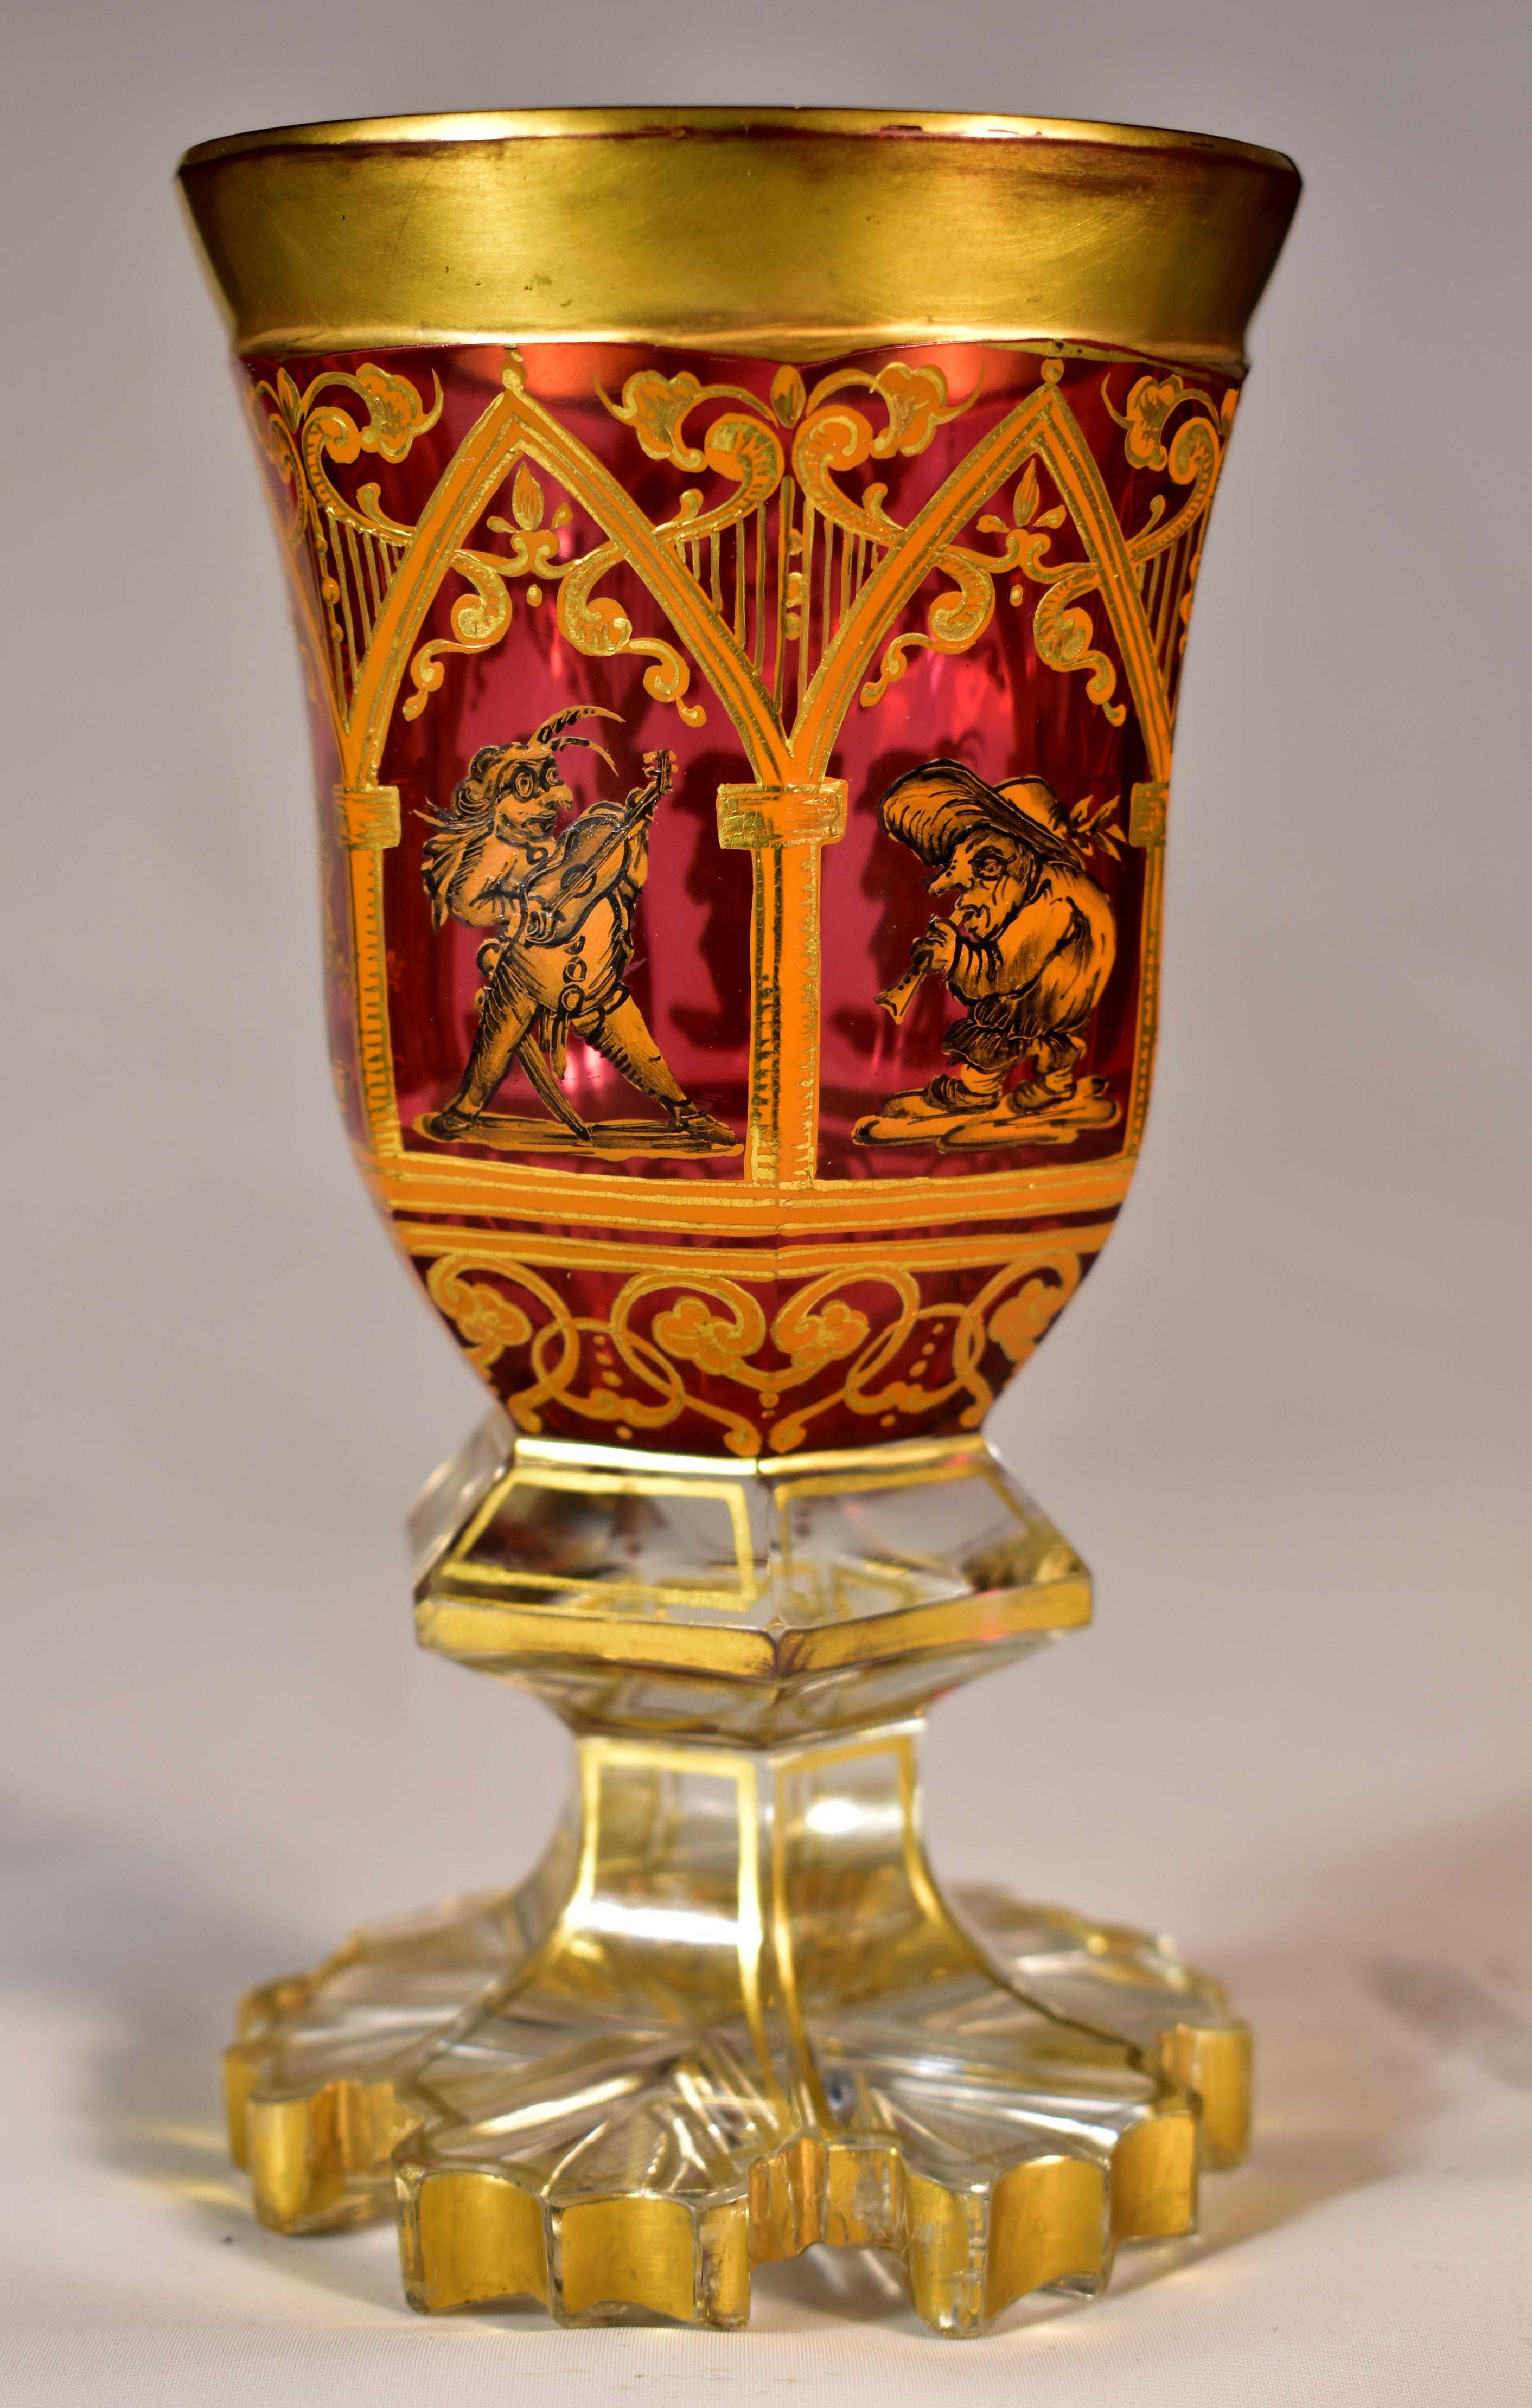 A beautiful ruby goblet with a clear foot, cut and painted, The portals are painted in ocher color and everything is complemented by gilding, In the Portals, there are painted figures of musician sprites. The bottom of the goblet is especially